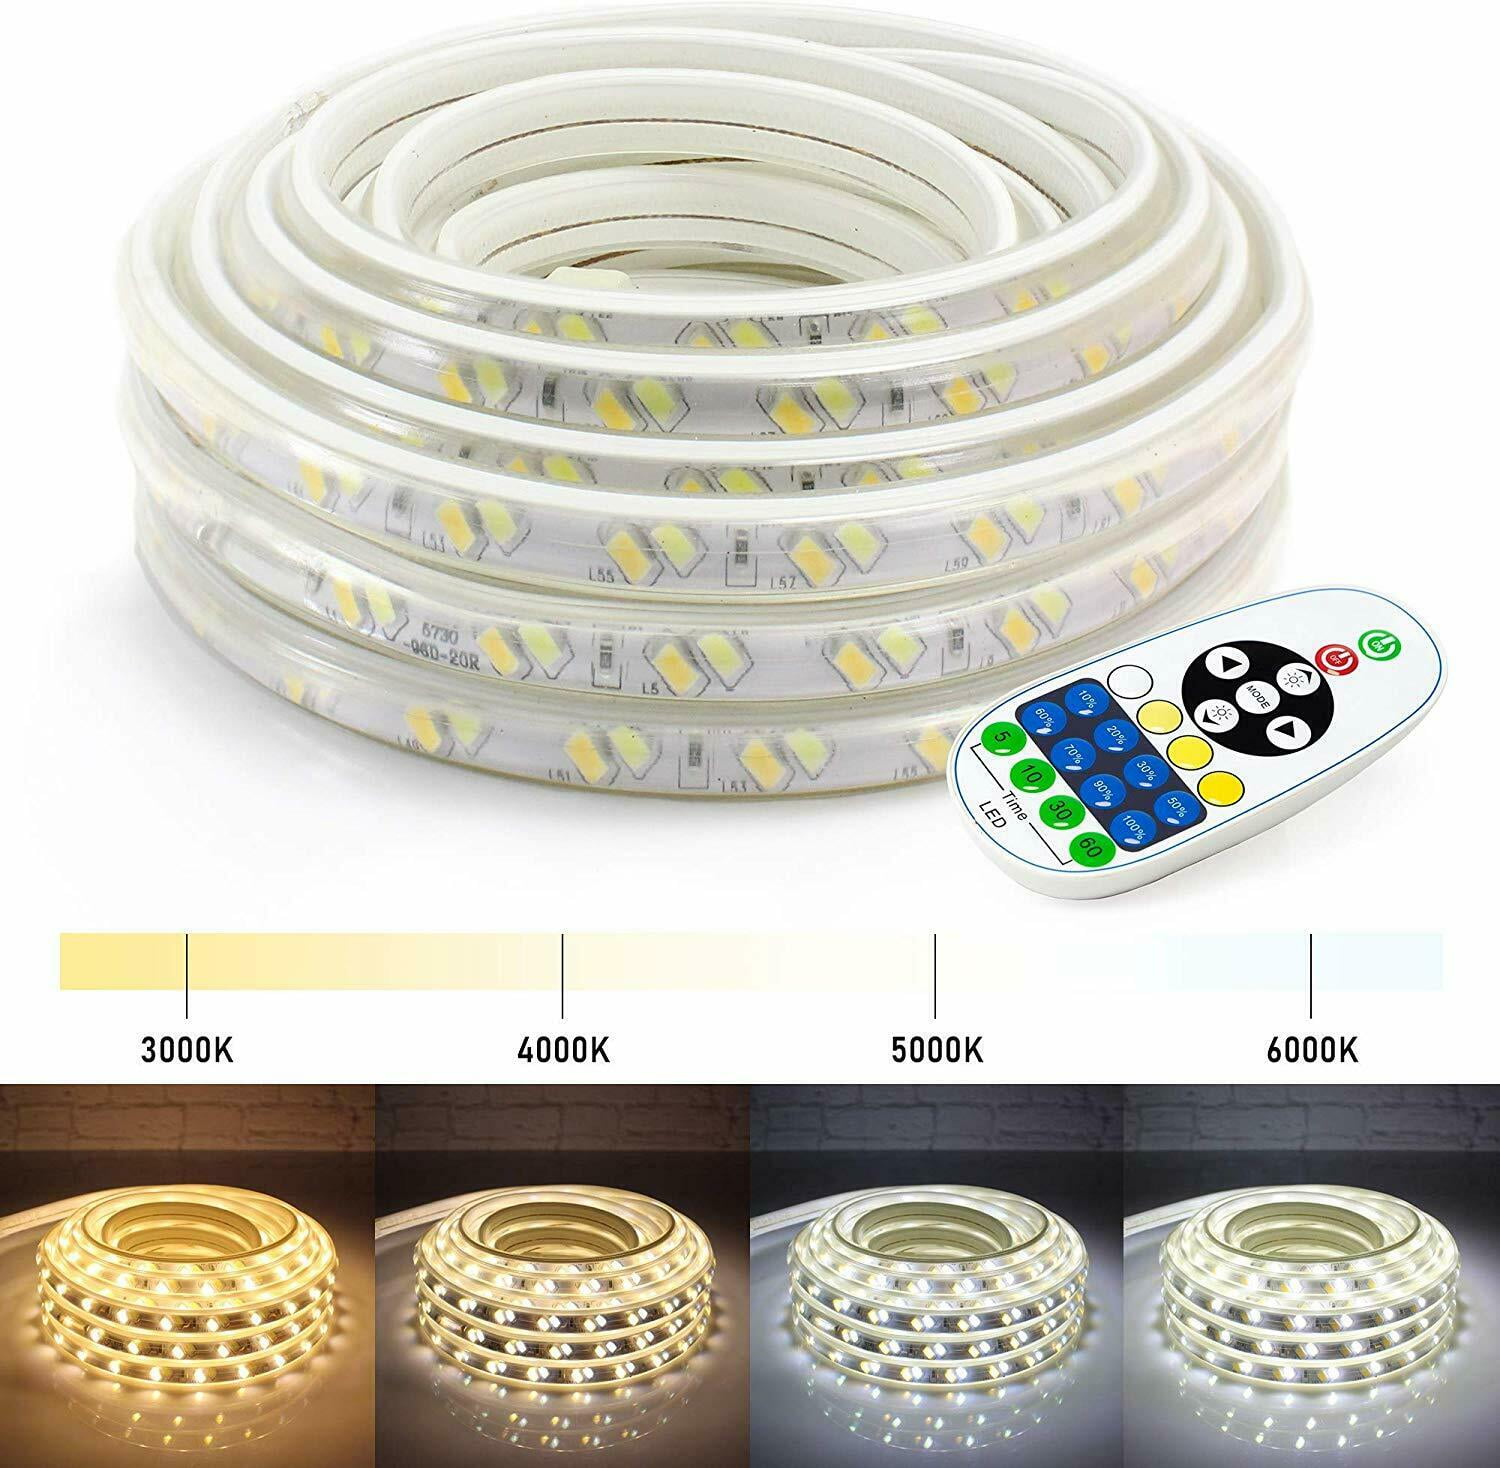 25ft 300 LEDs COOL WHITE 8-Mode Controller Extendable LED Rope Lights Holiday 